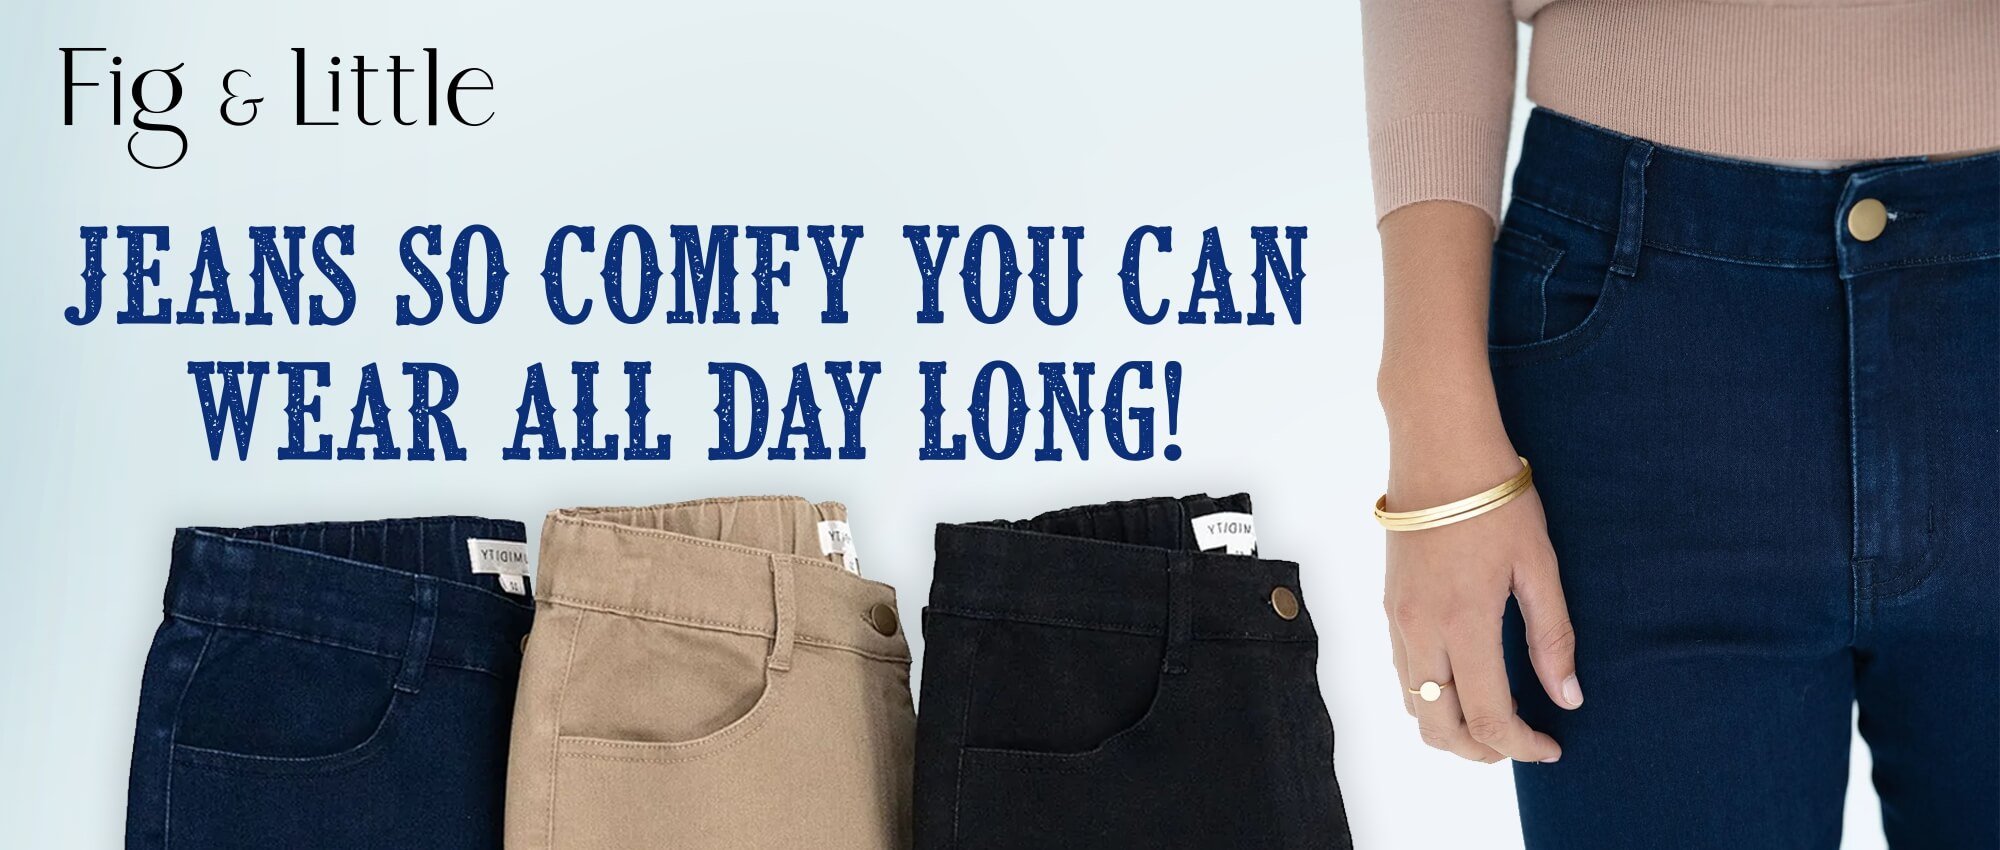 JEANS SO COMFY YOU CAN WEAR ALL DAY LONG!